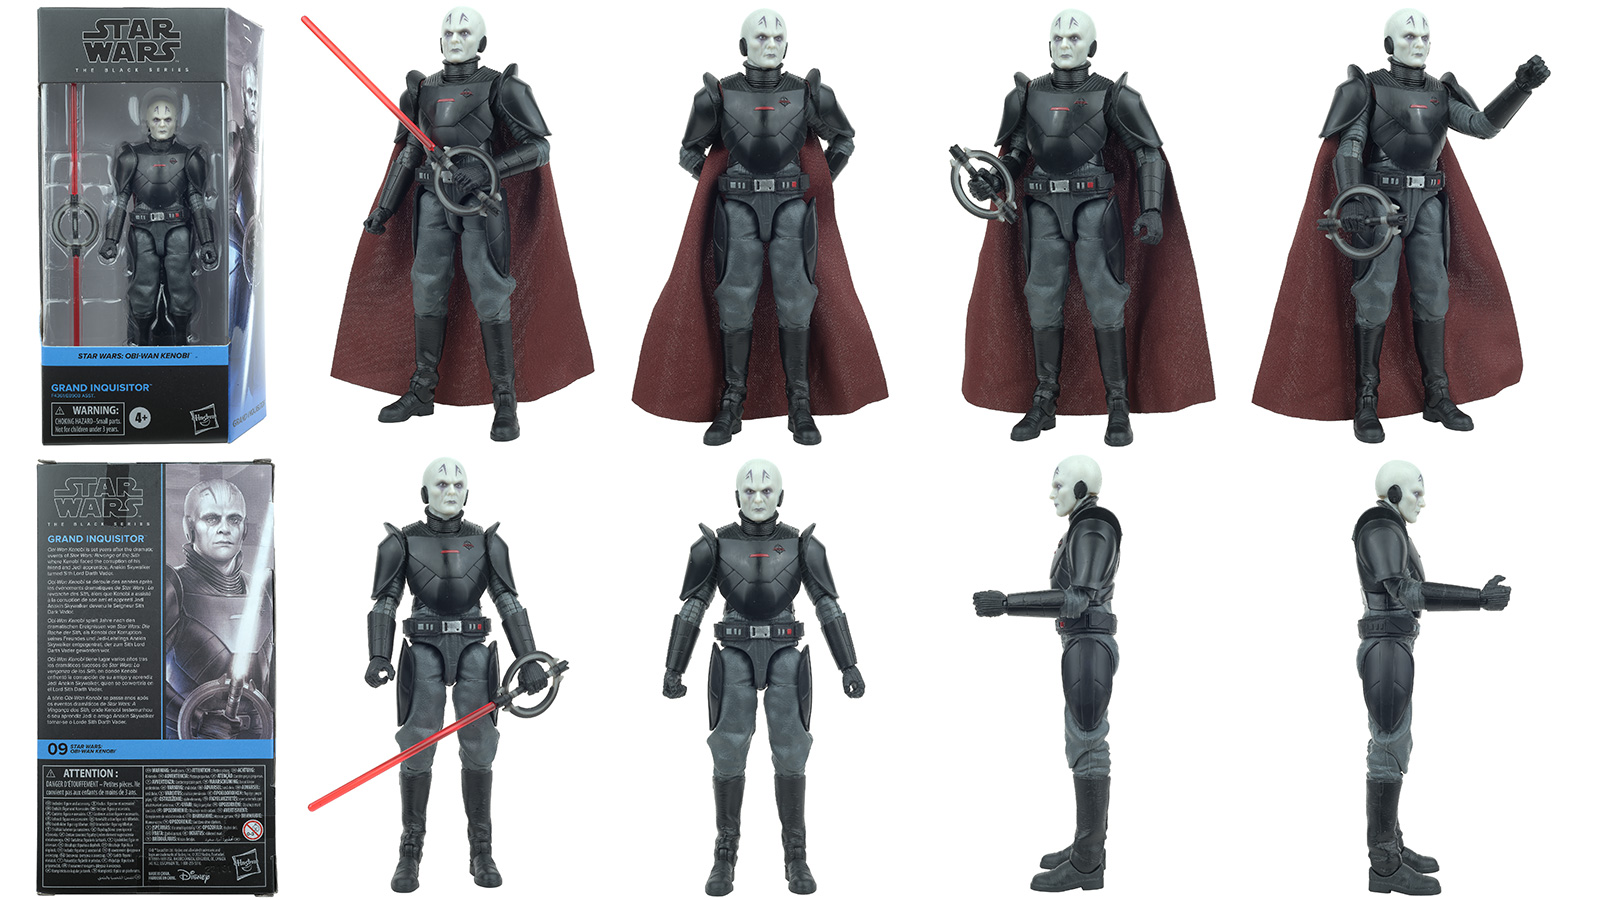 New Photos - The Black Series 6-Inch 09: Grand Inquisitor